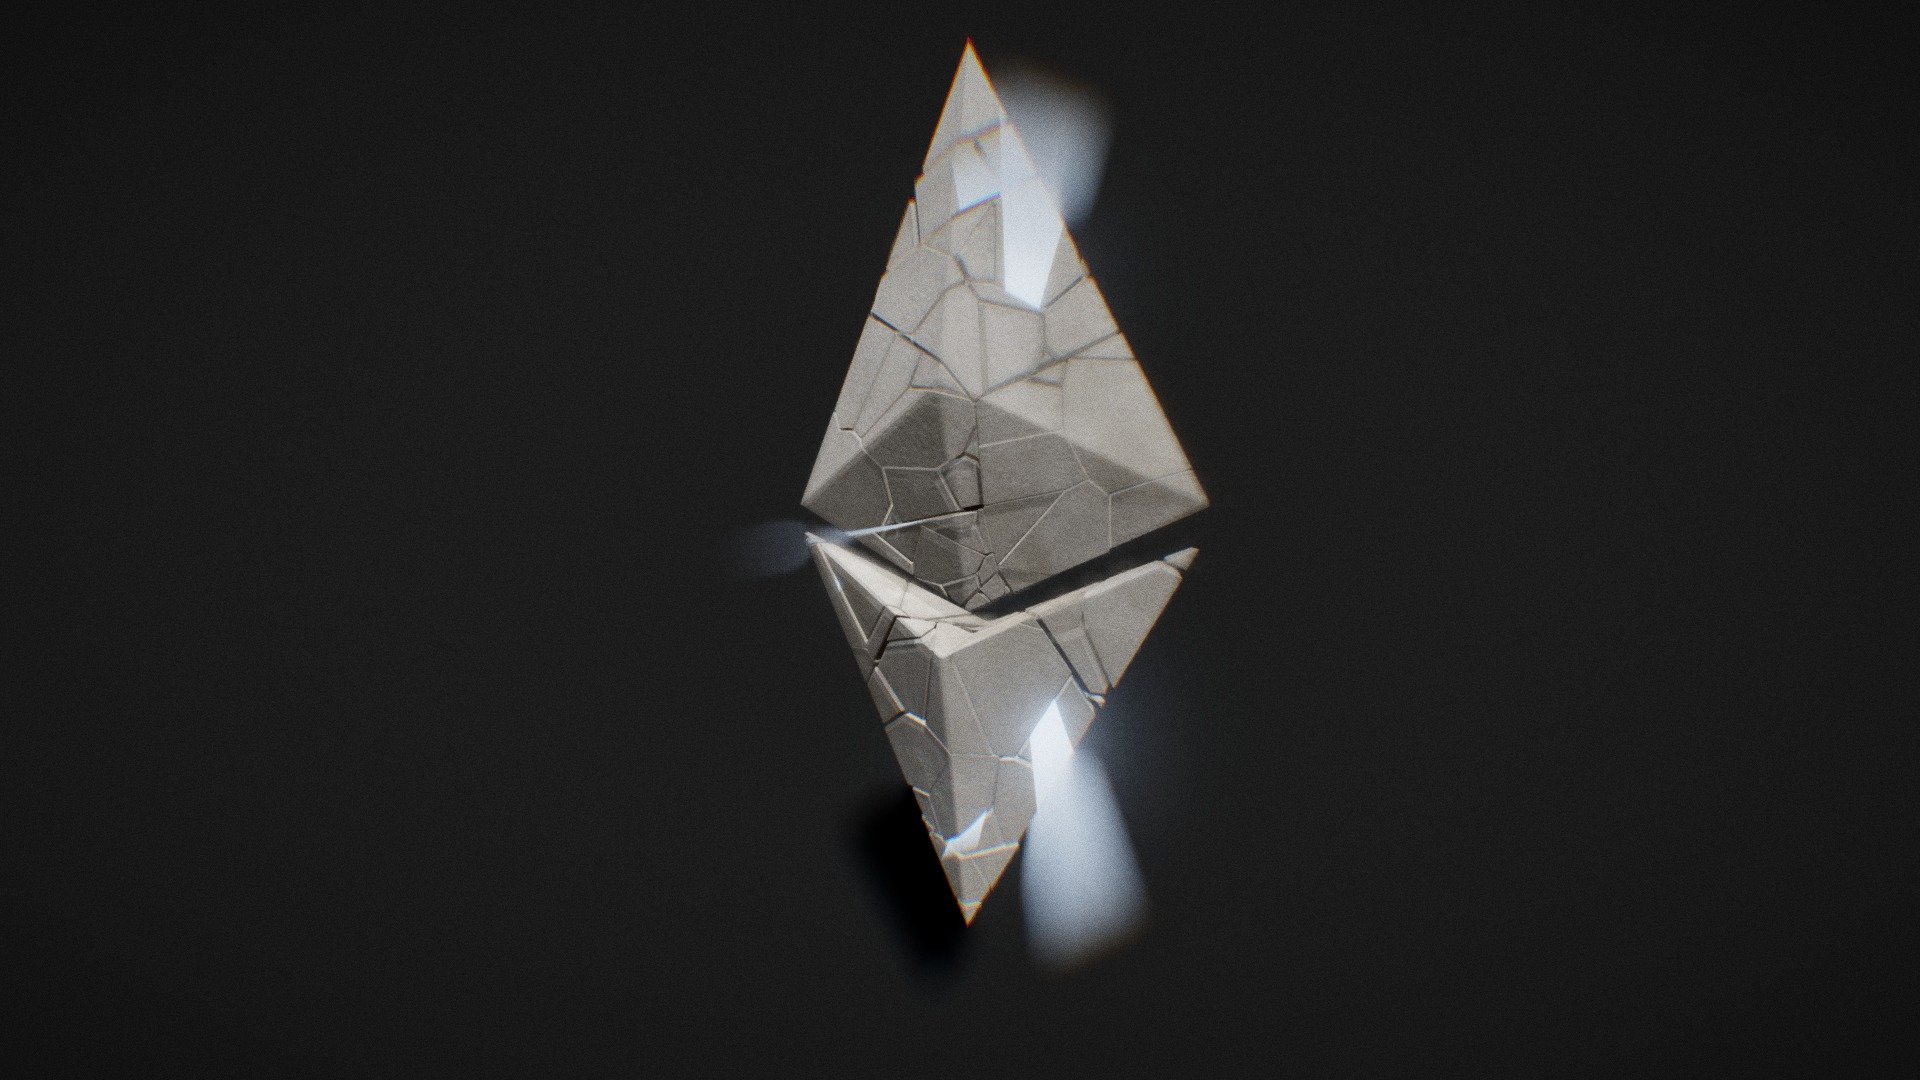 Here's an Animation of the ethereum rock formed shaped Explsition, where the big ethereum shaped formed by small rocks explodes, and revels the small powerfull ETH Diamond from inside 3d model